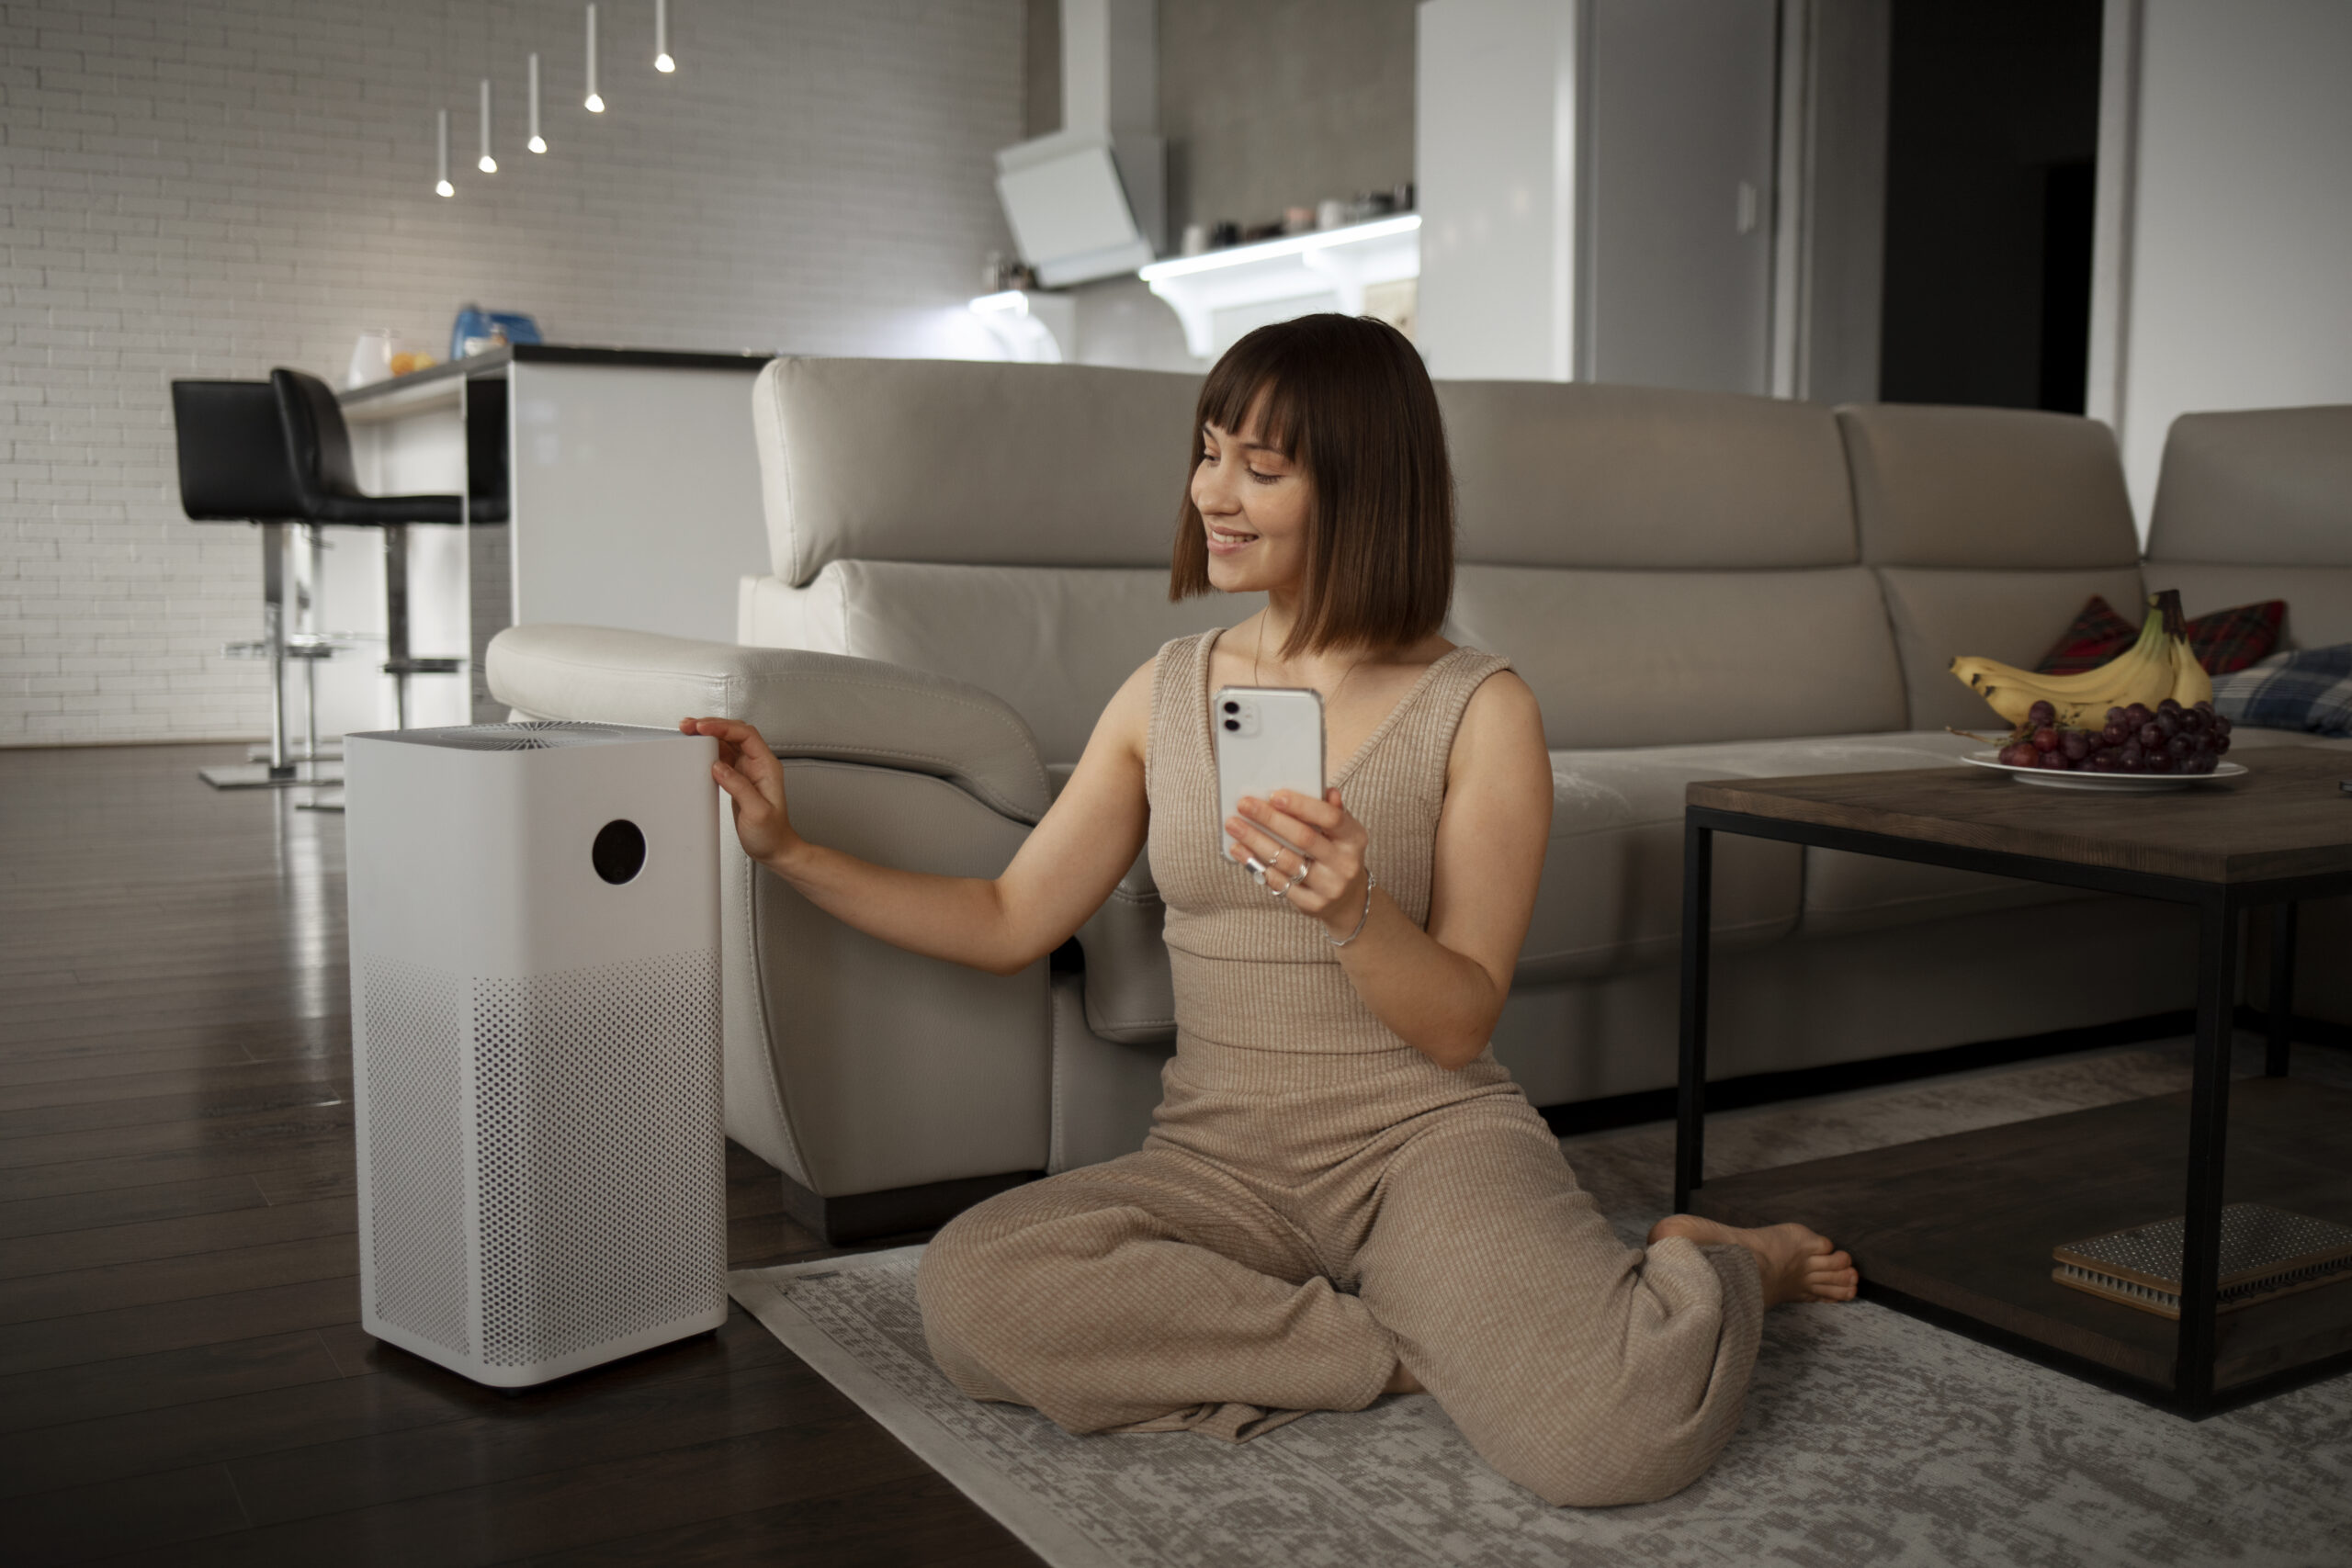 Bionaire Air Purifier Solutions: Say Goodbye to Indoor Pollution